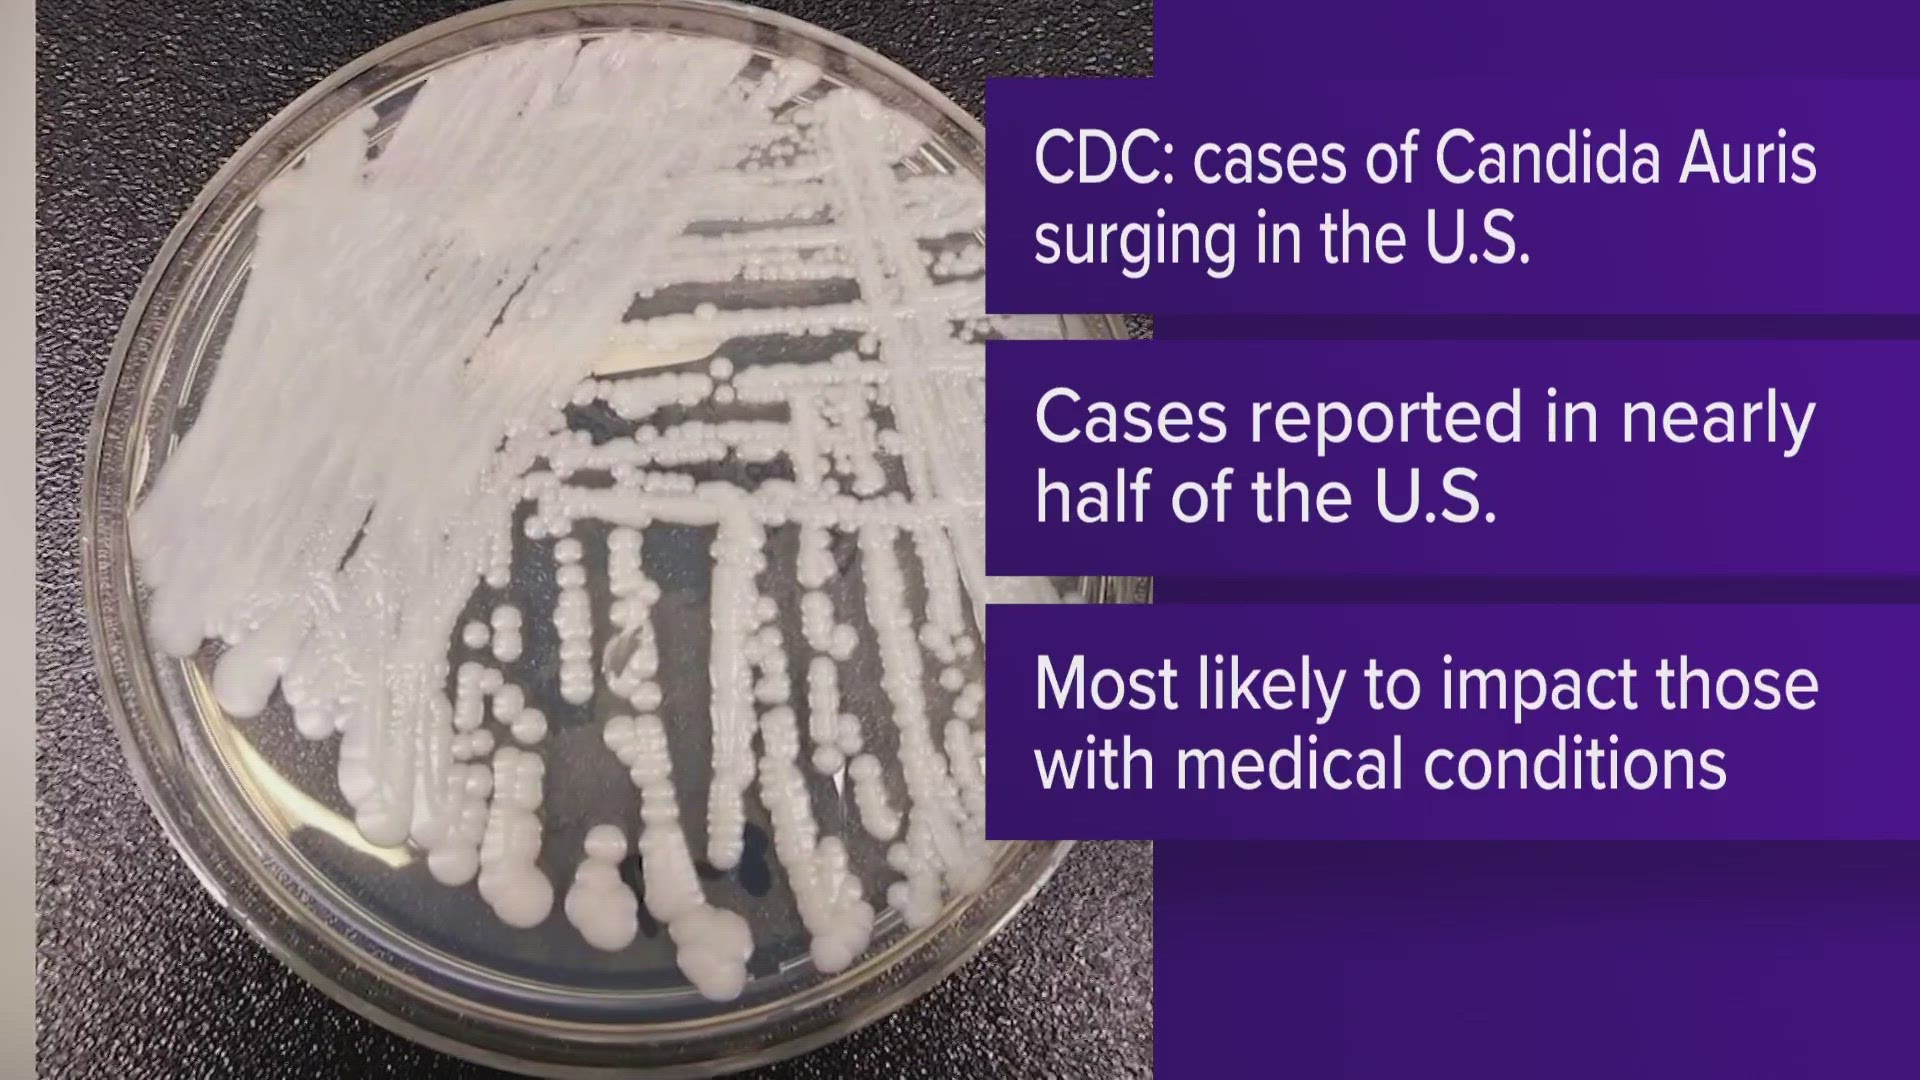 The spread of Candida auris may have worsened due to the strain COVID-19 put on the health care system, researchers said.